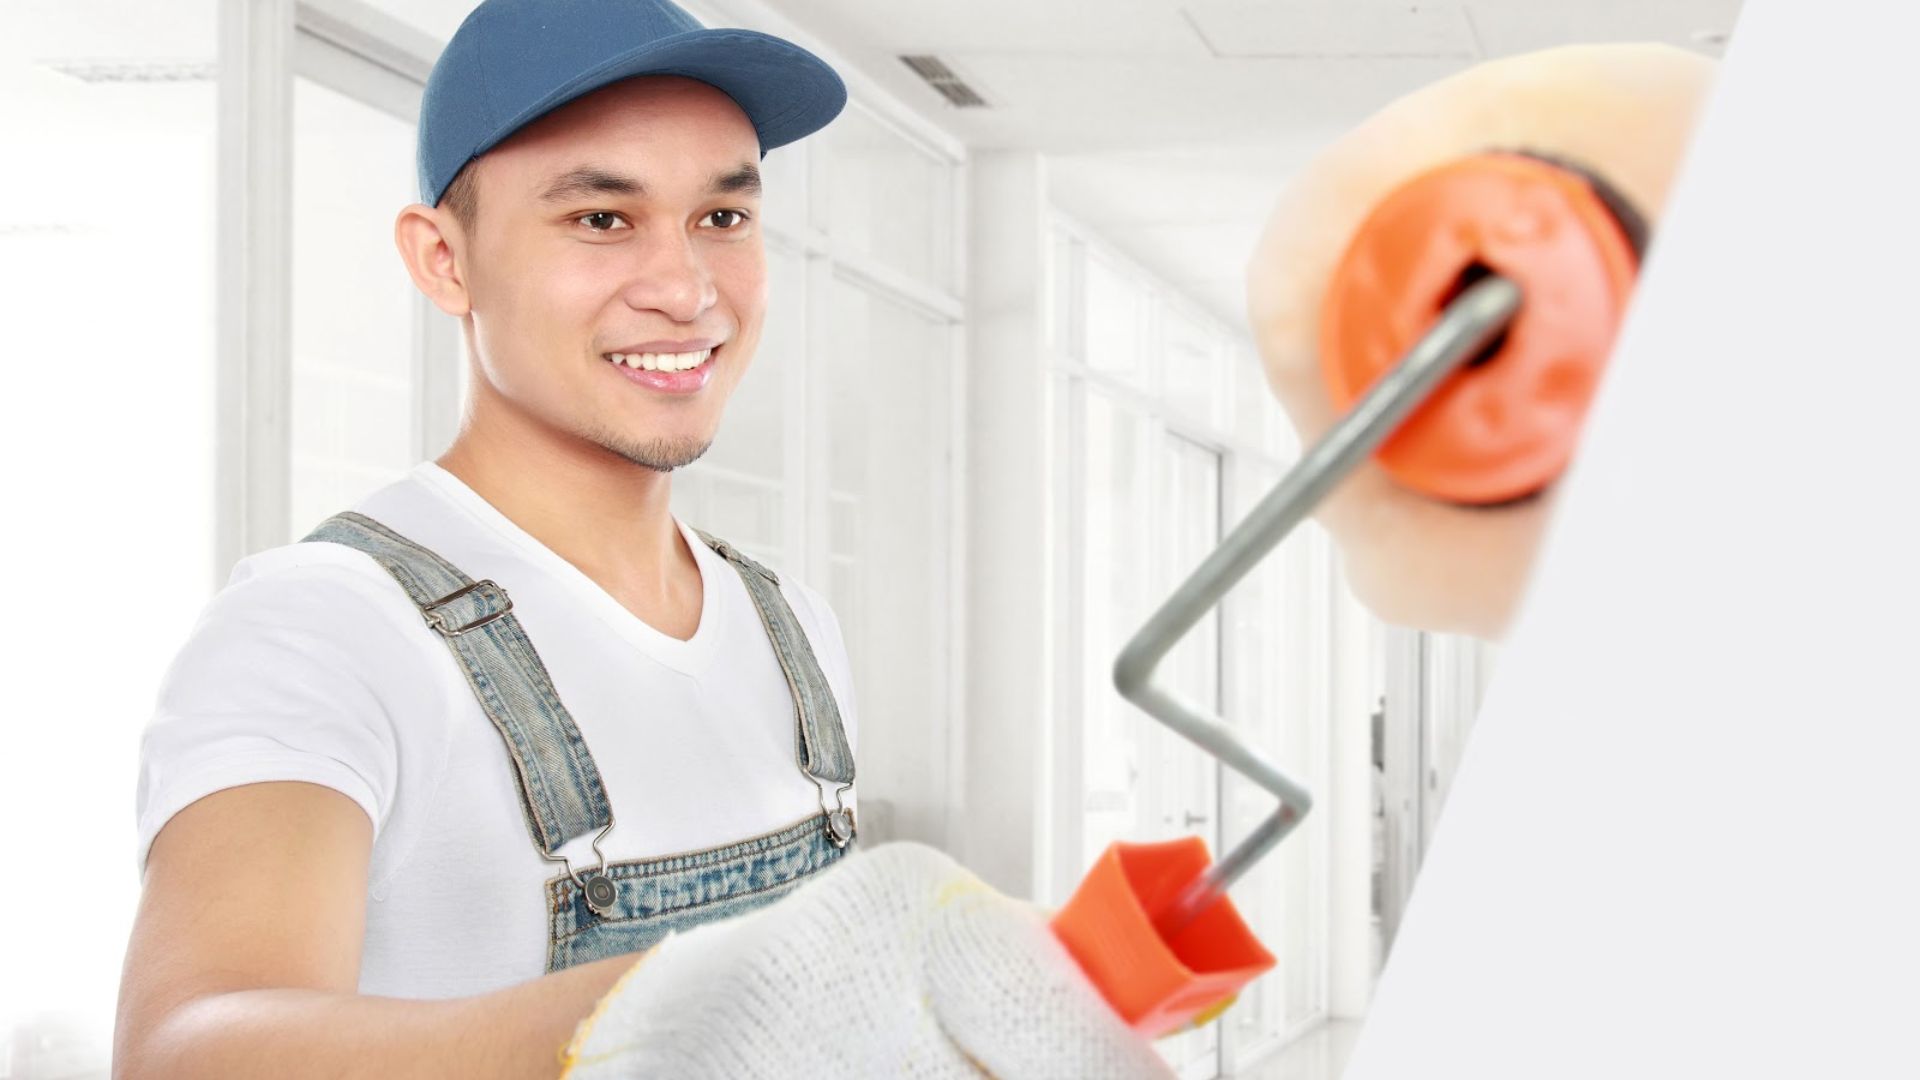 Benefits of Professional Painting Services for Increasing Property Value